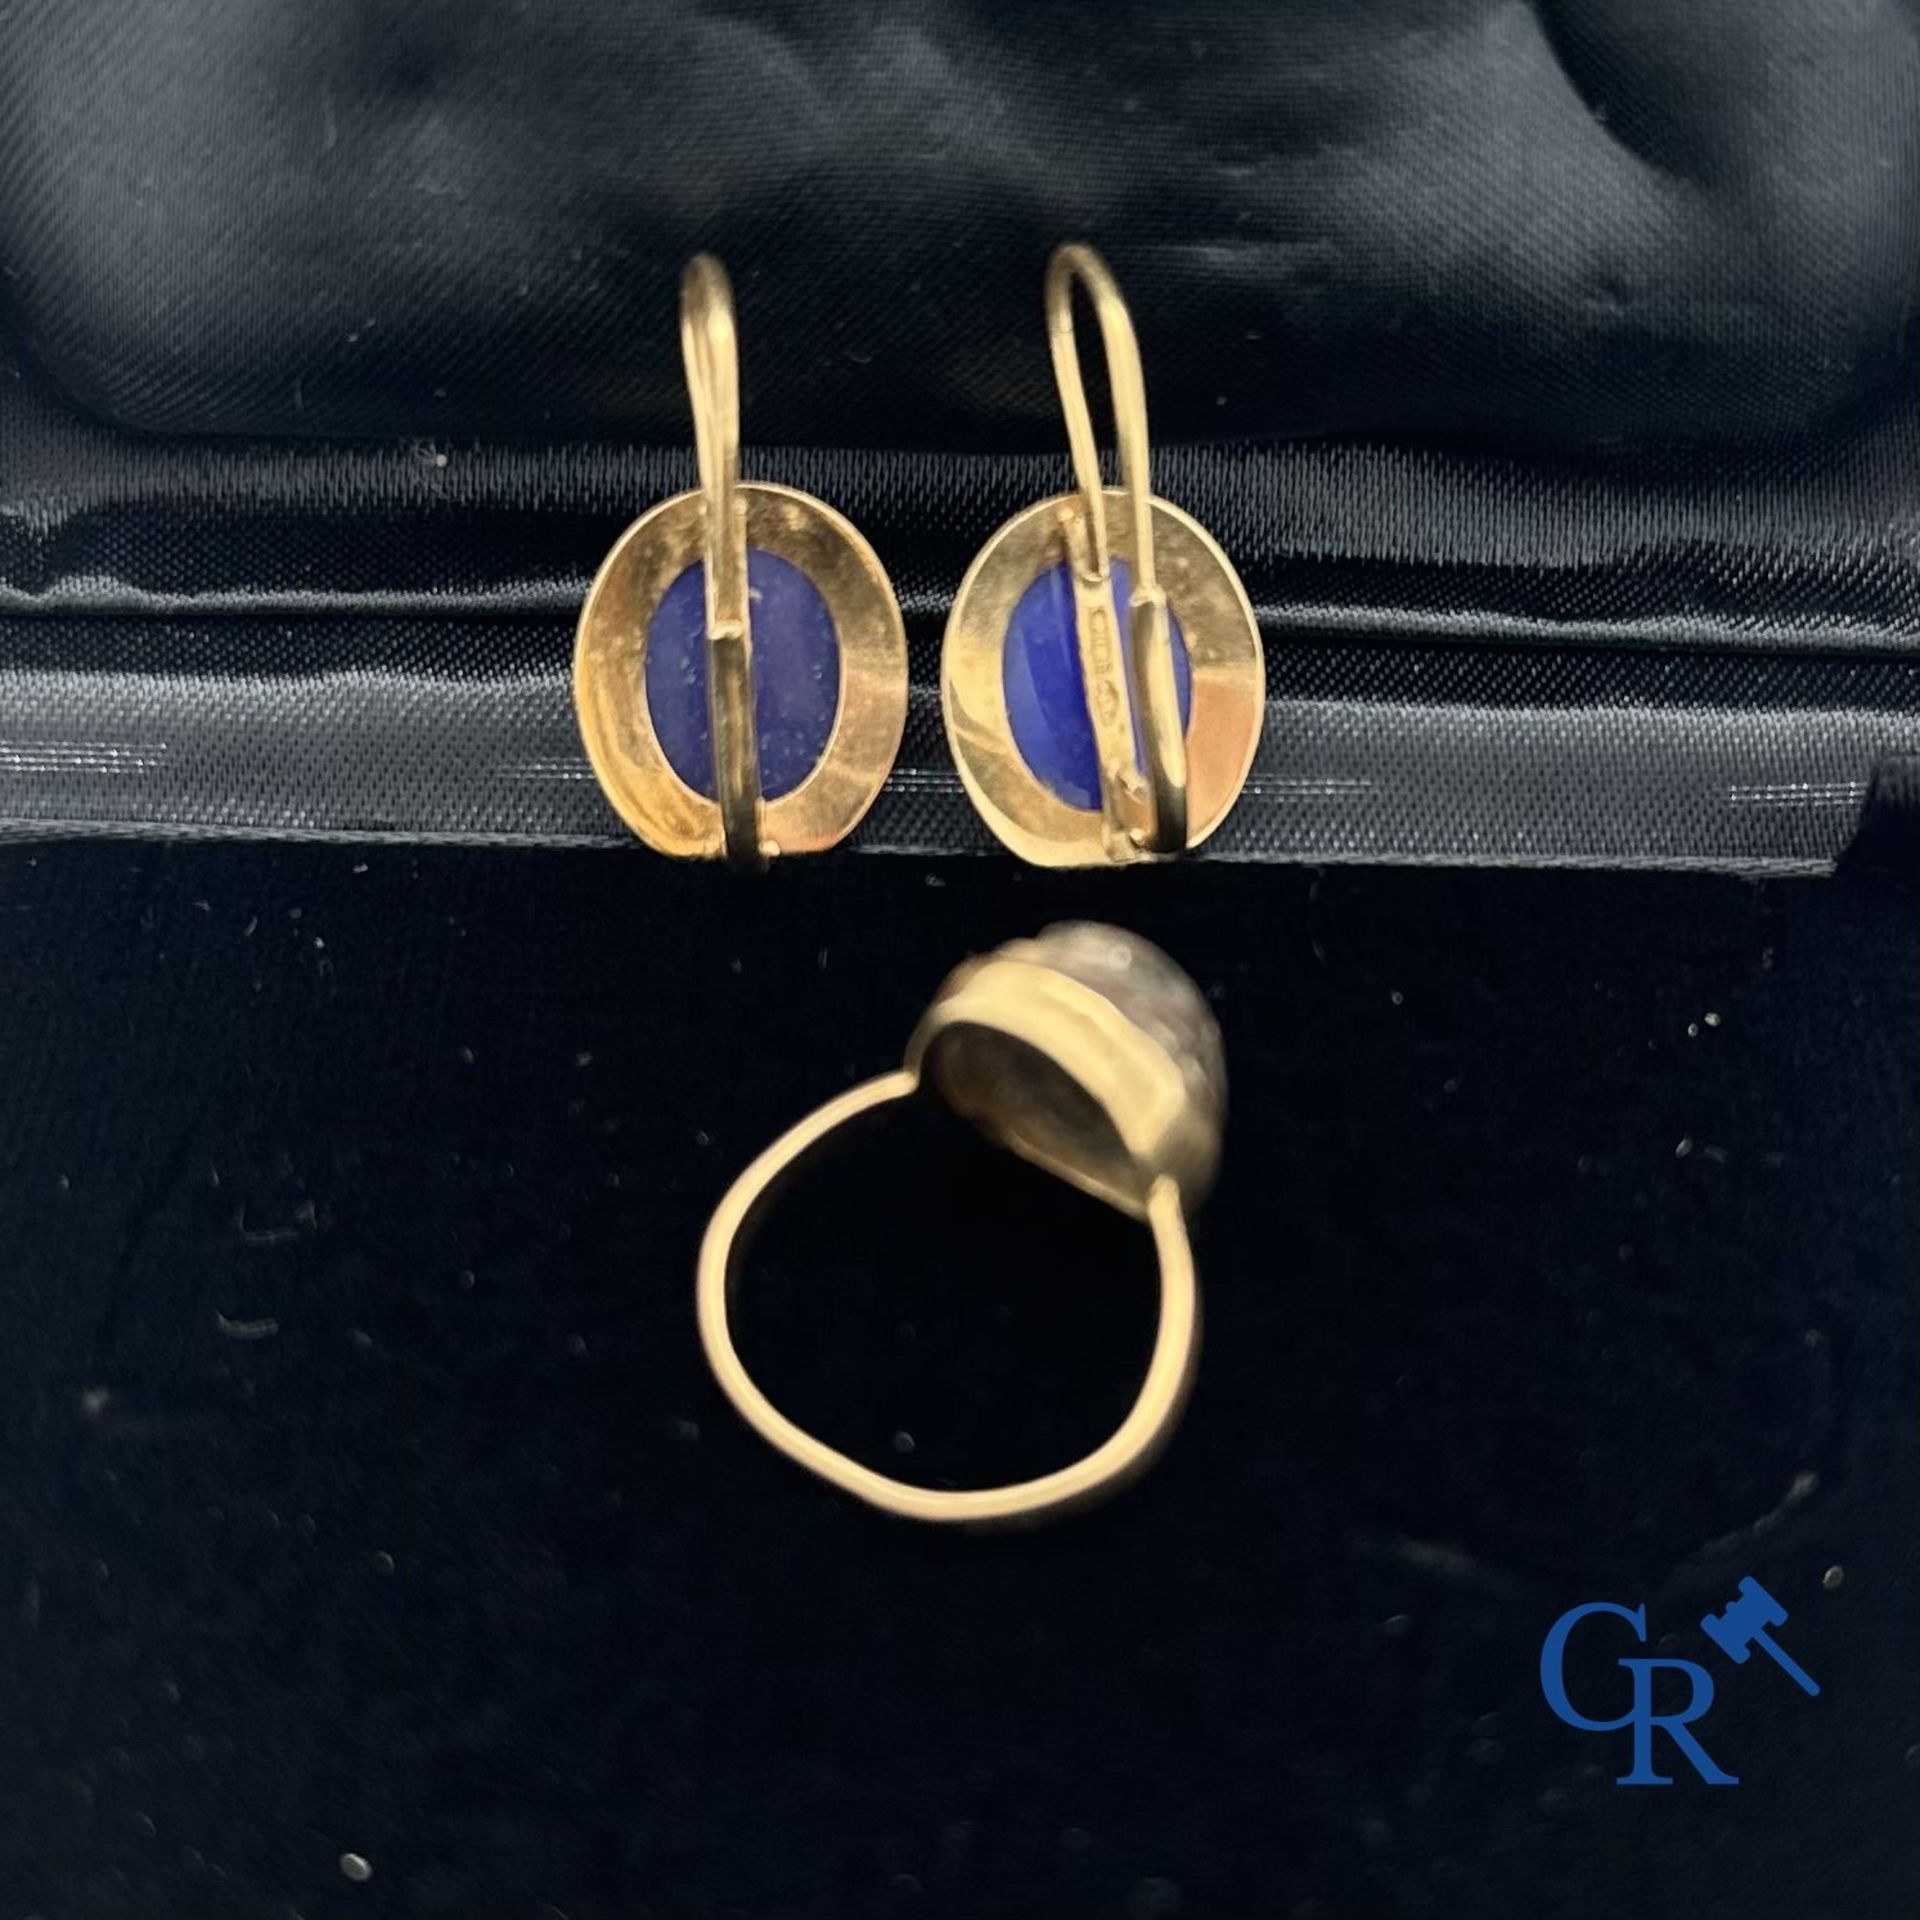 Jewellery: Lot consisting of a ring in gold 18K and a pair of earrings in gold 18K. - Bild 2 aus 4